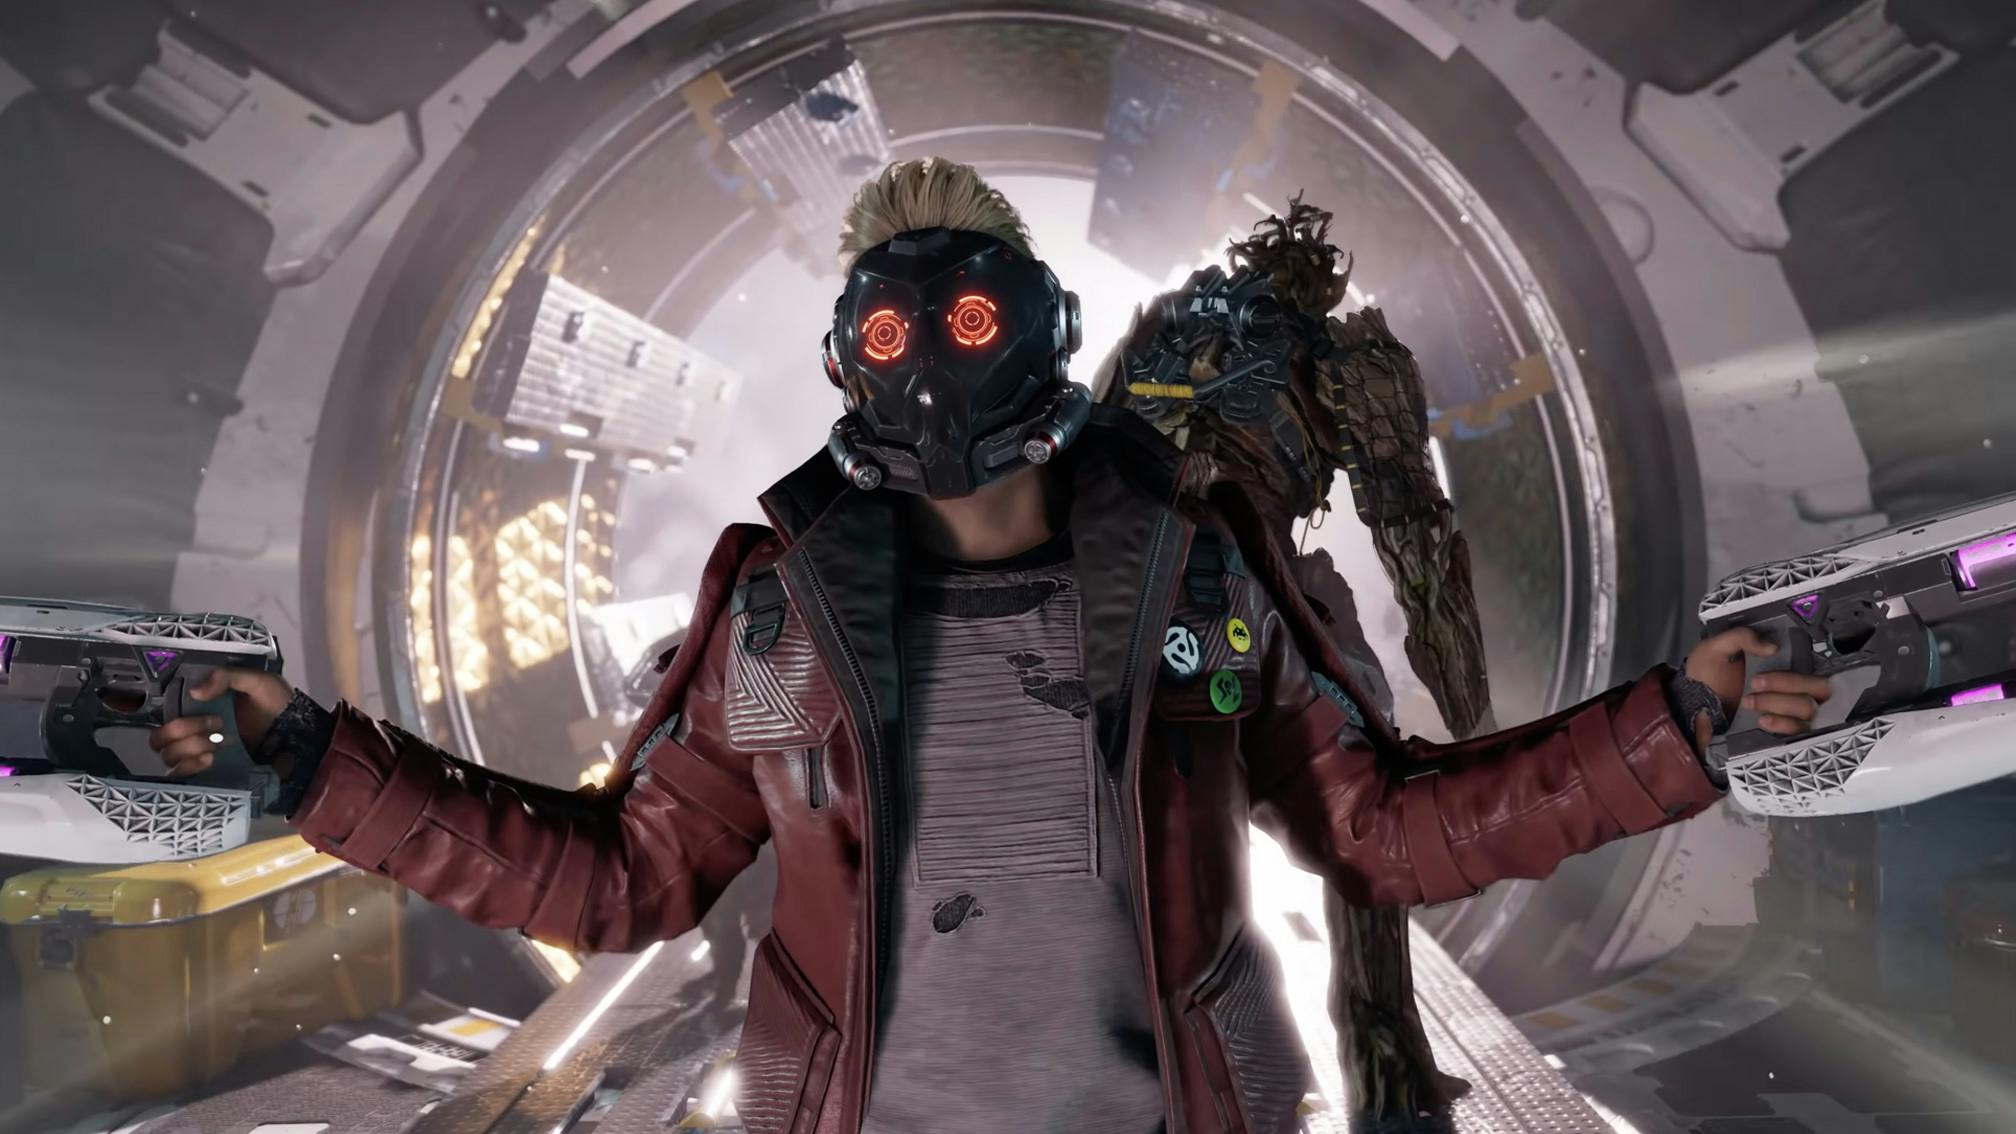 New Guardians Of The Galaxy game announced; Iron Maiden, KISS to feature on soundtrack